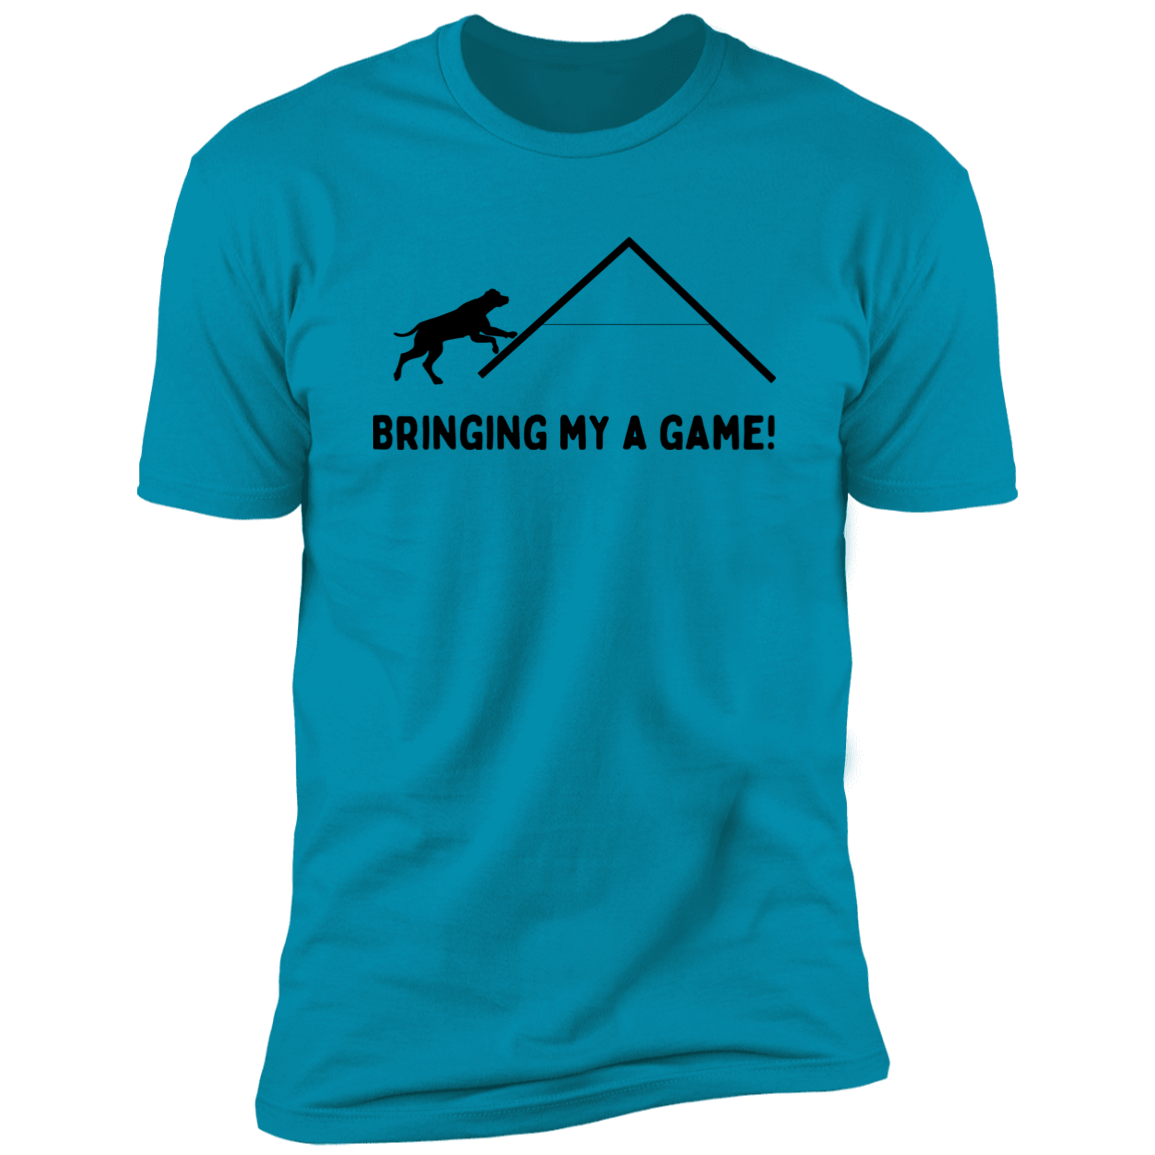 Bringing My A Game Agility T-shirt, Dog Agility Shirt for humans, in turquoise